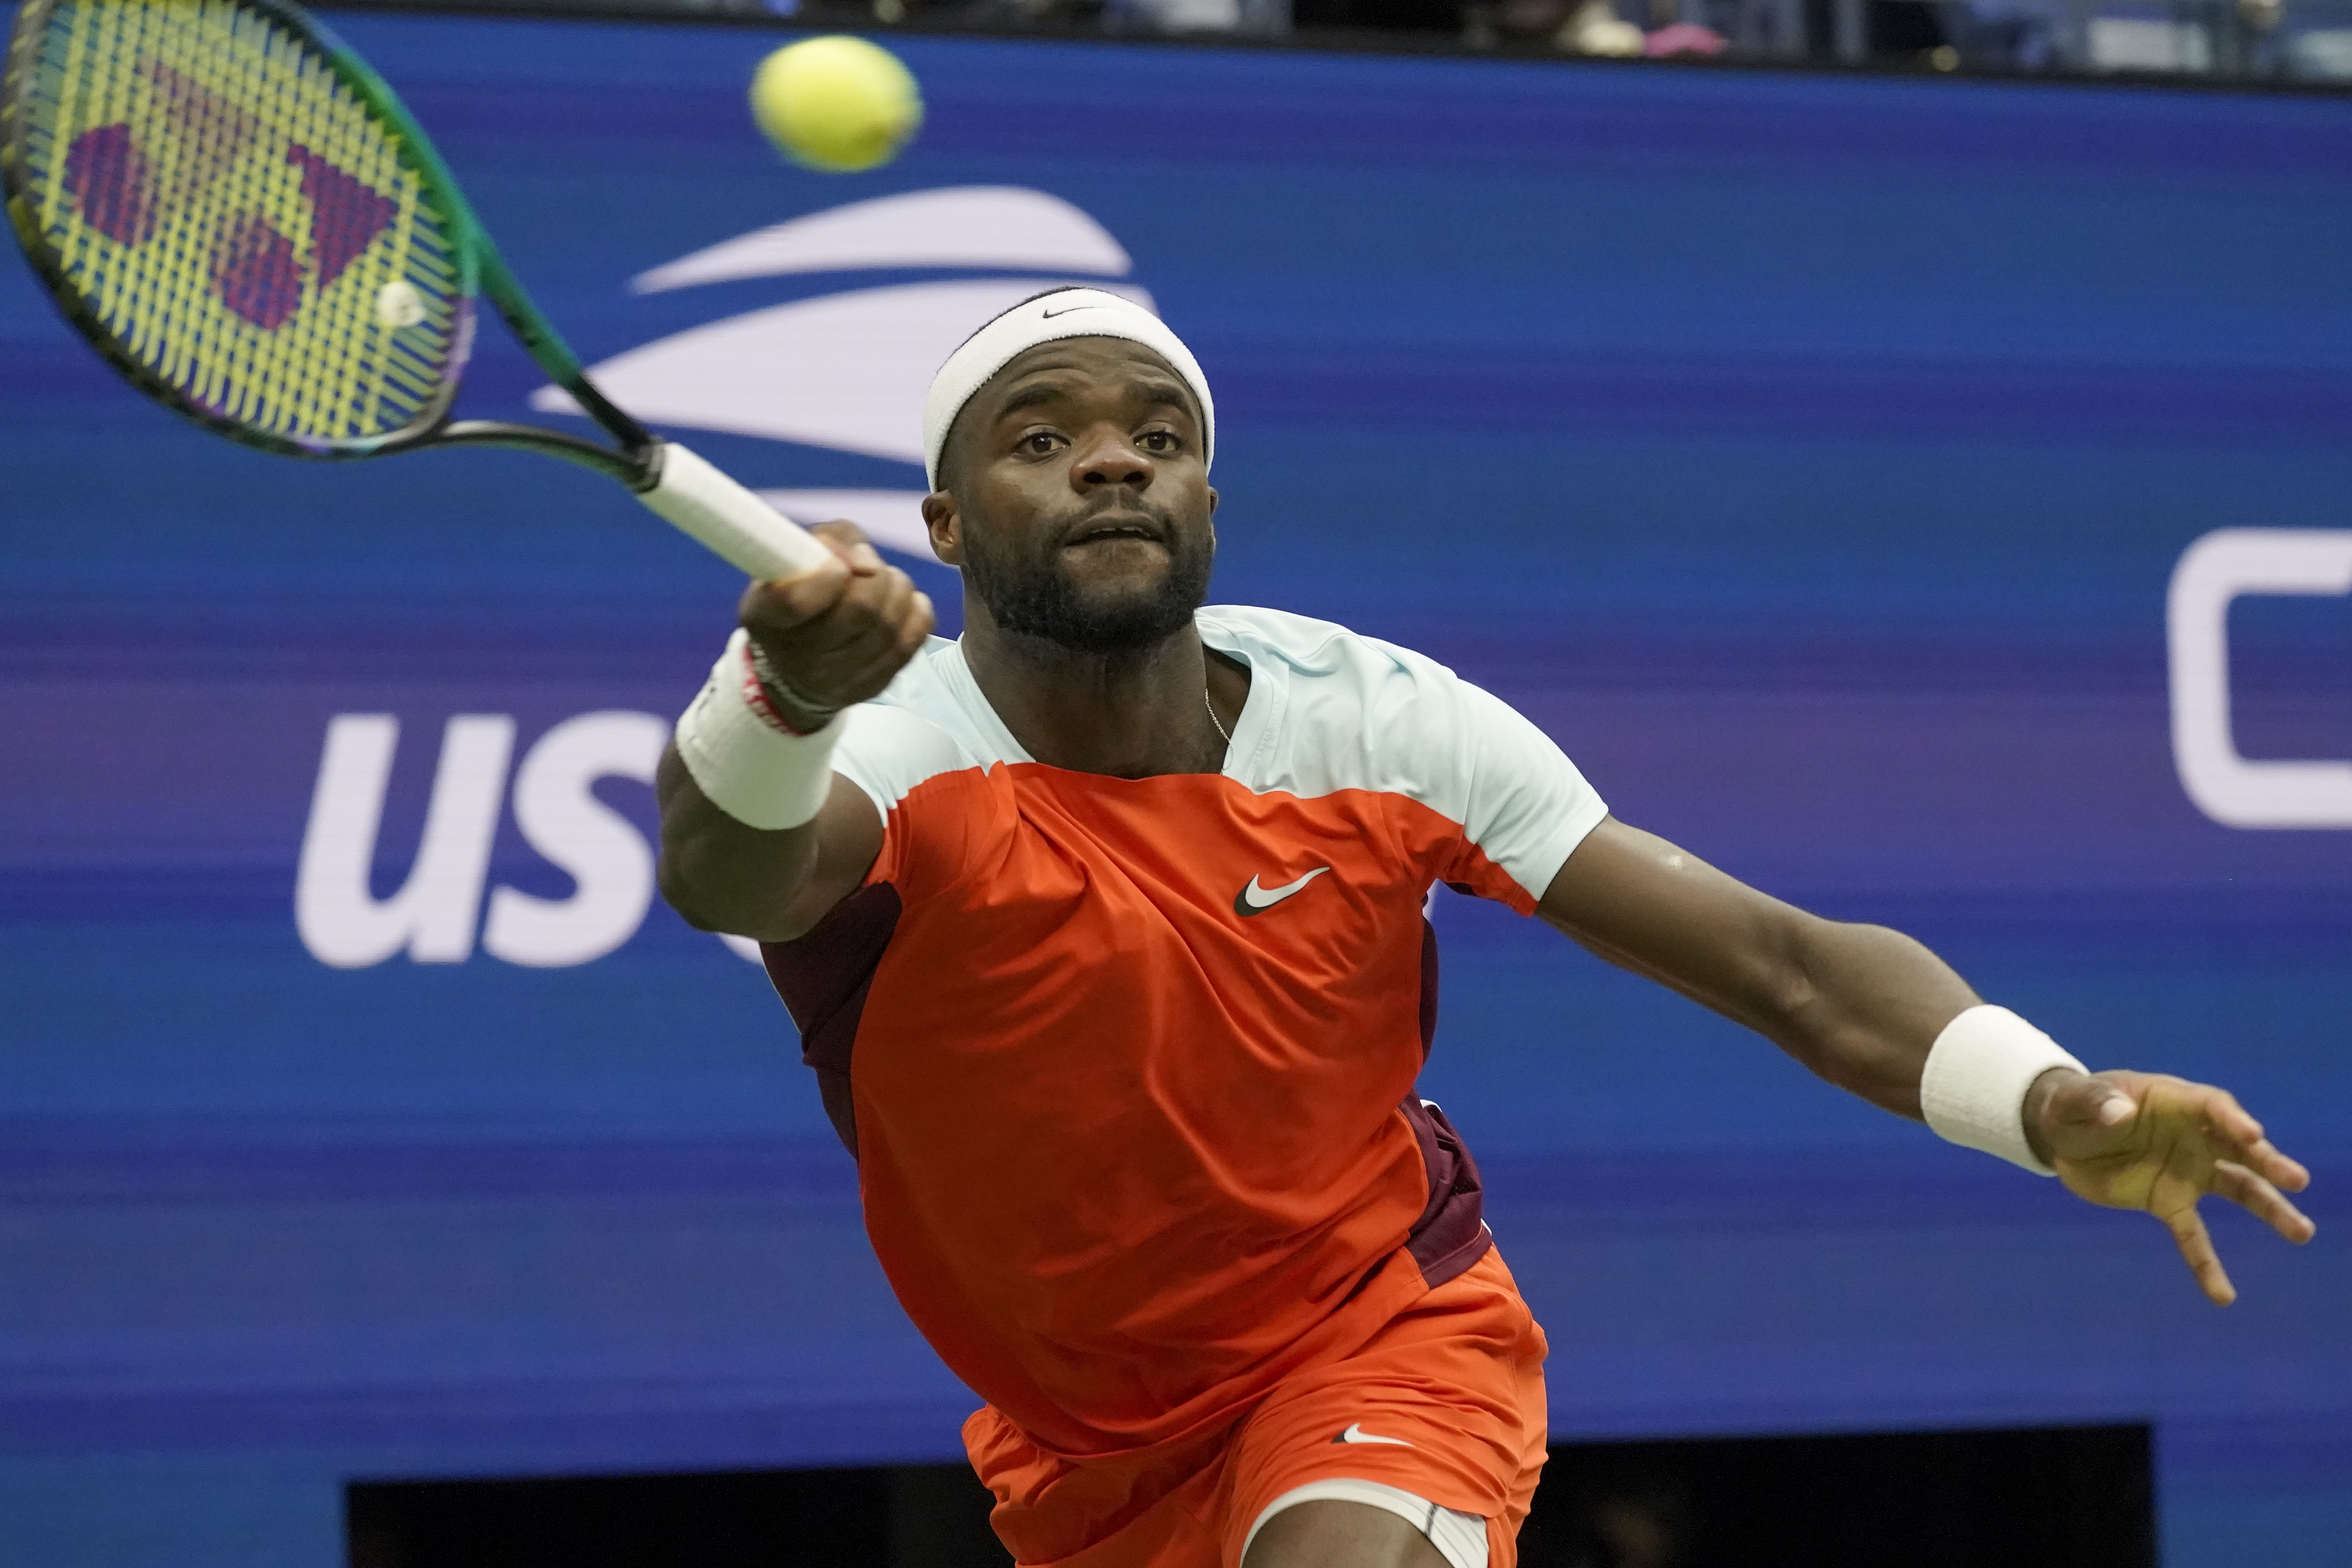 How to watch Frances Tiafoe at . Open | FREE live stream, time, TV,  channel for singles match vs. Carlos Alcaraz 